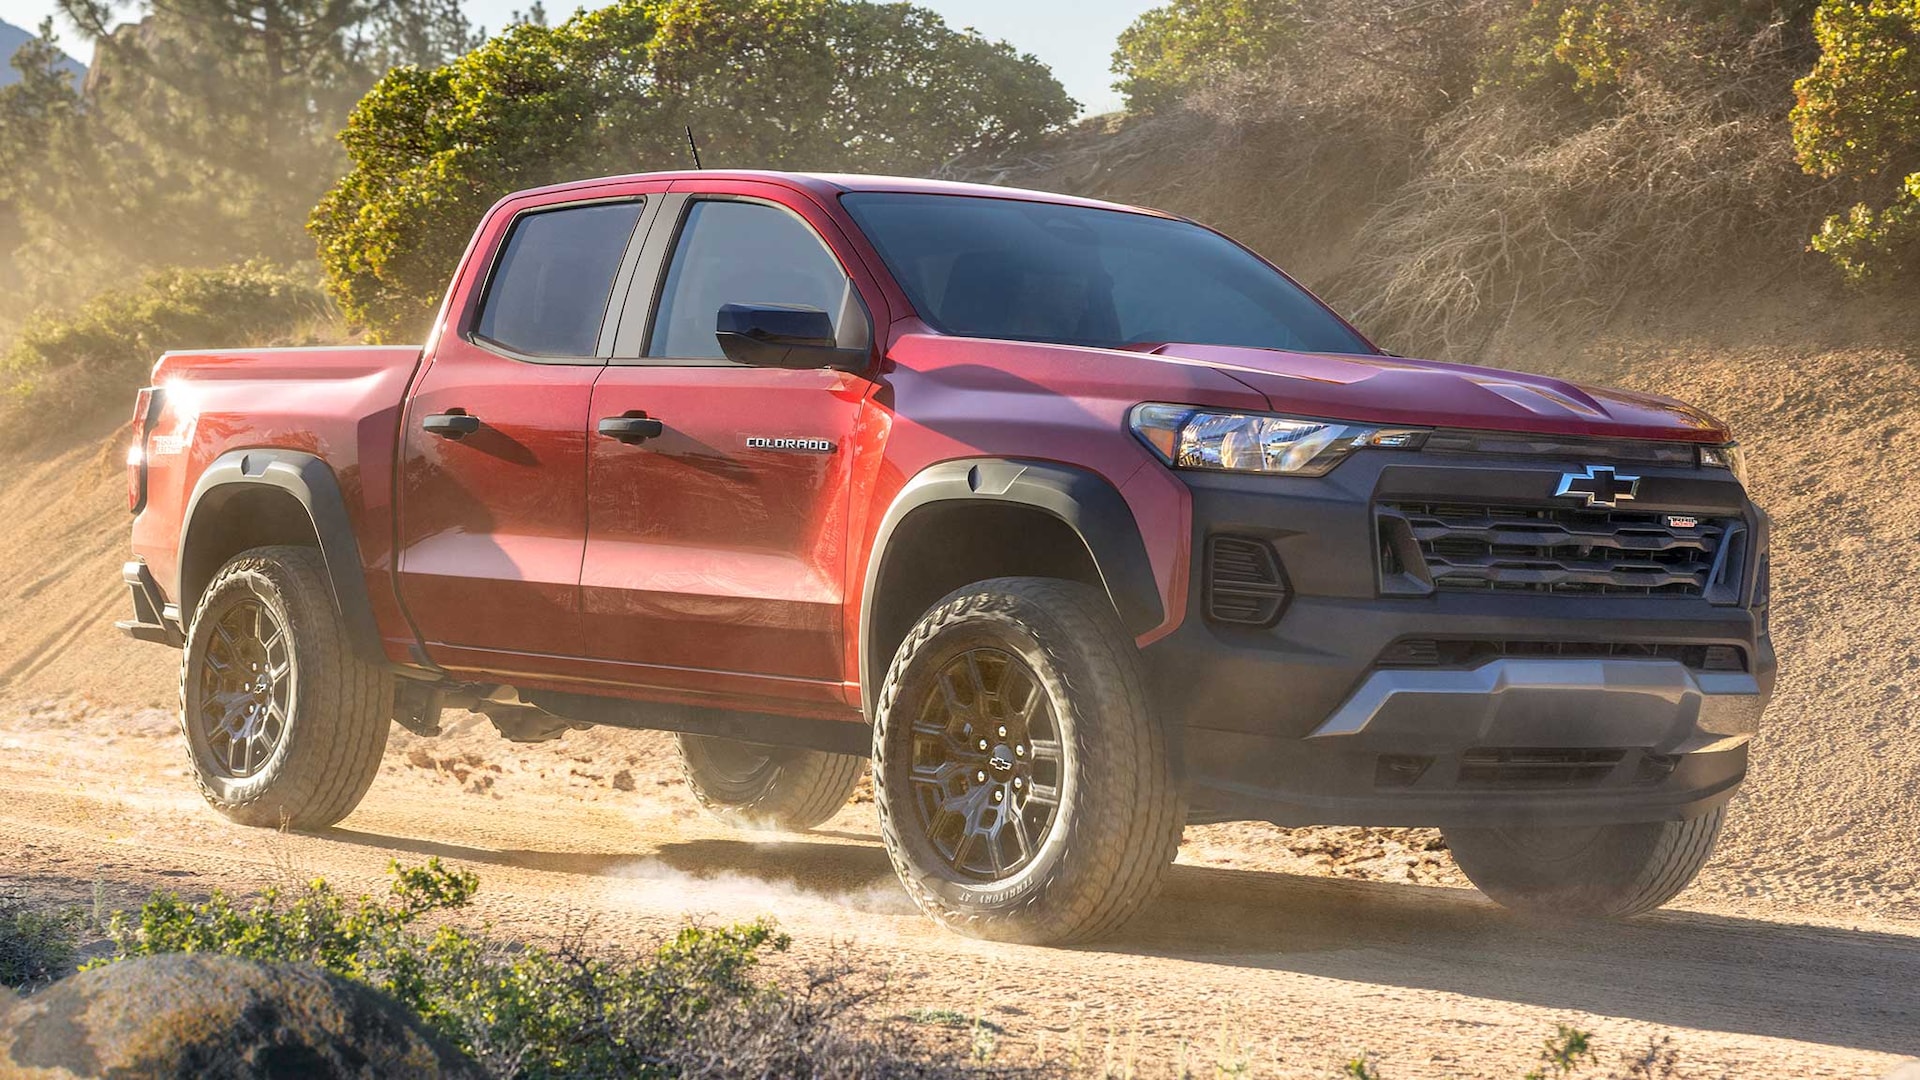 2023 Chevy Colorado Snatches Silverado Engine, Becomes Most Powerful Midsize Truck